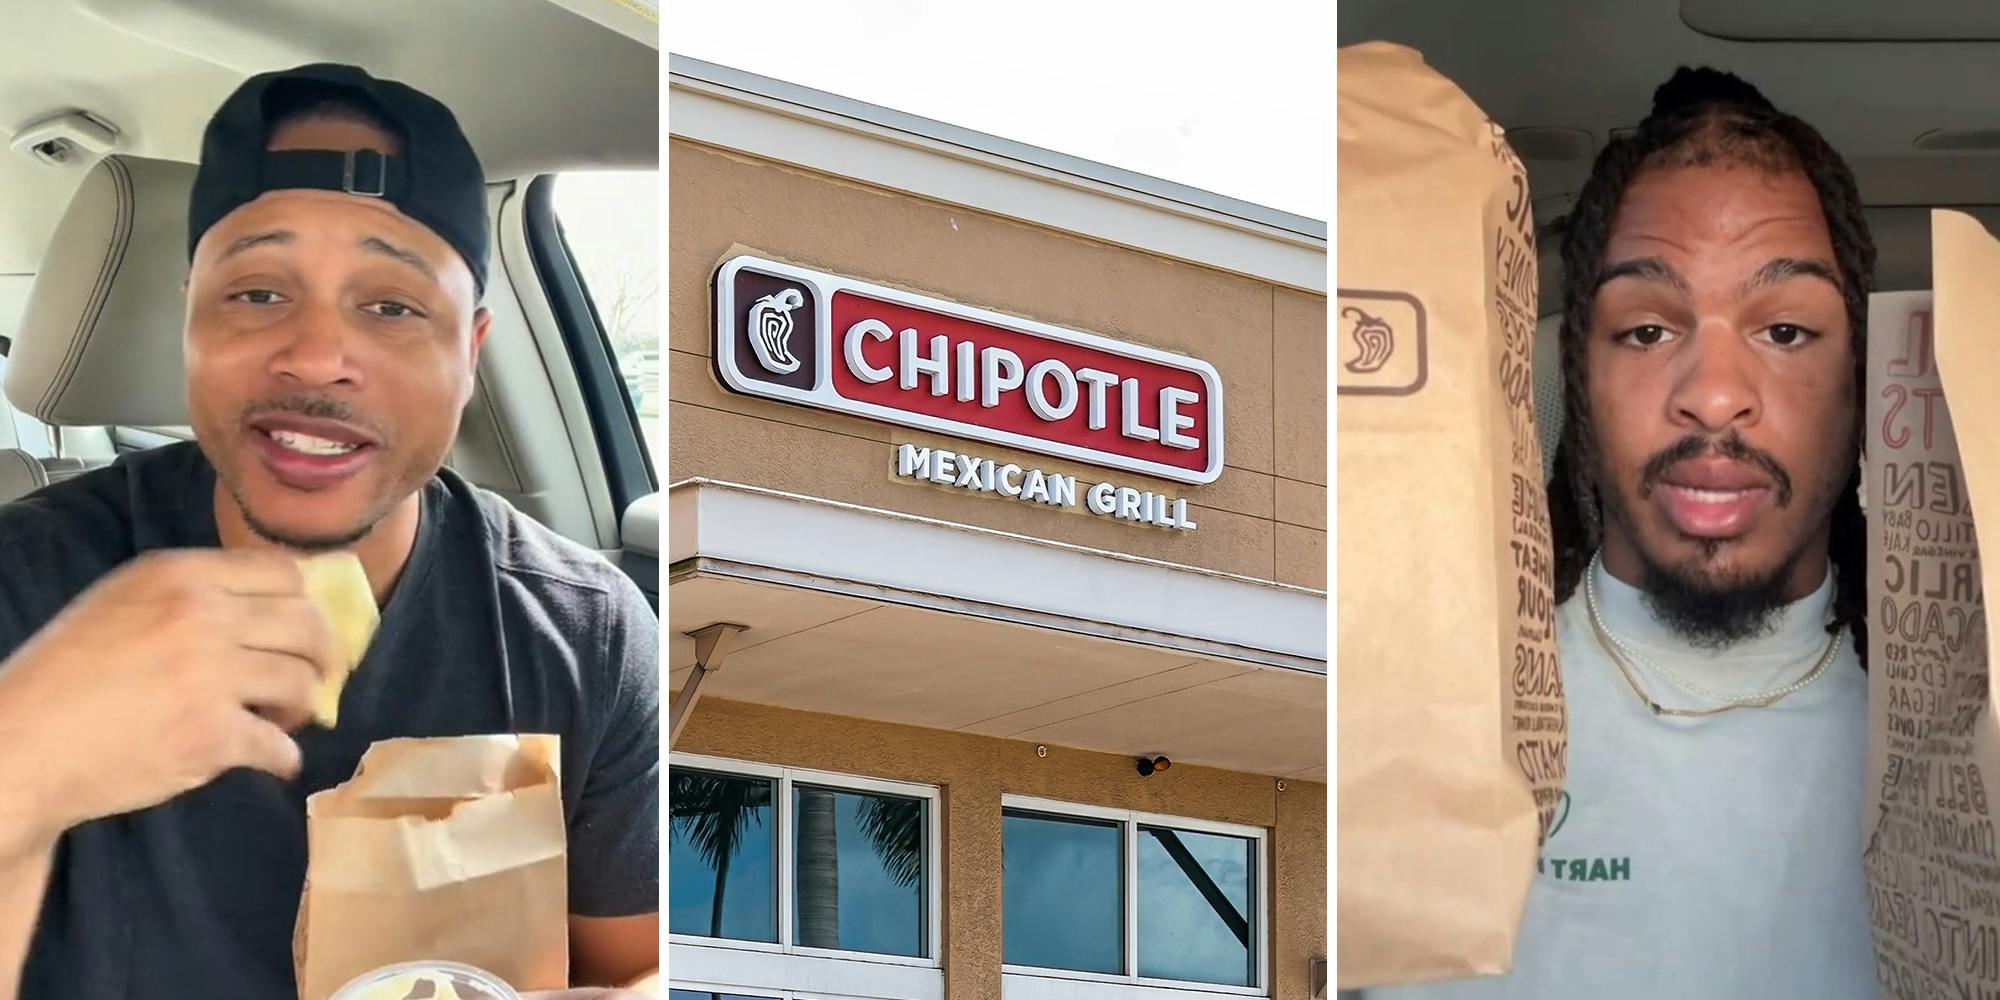 Chipotle says corporate is now telling them to look at customer's reaction when measuring scoops